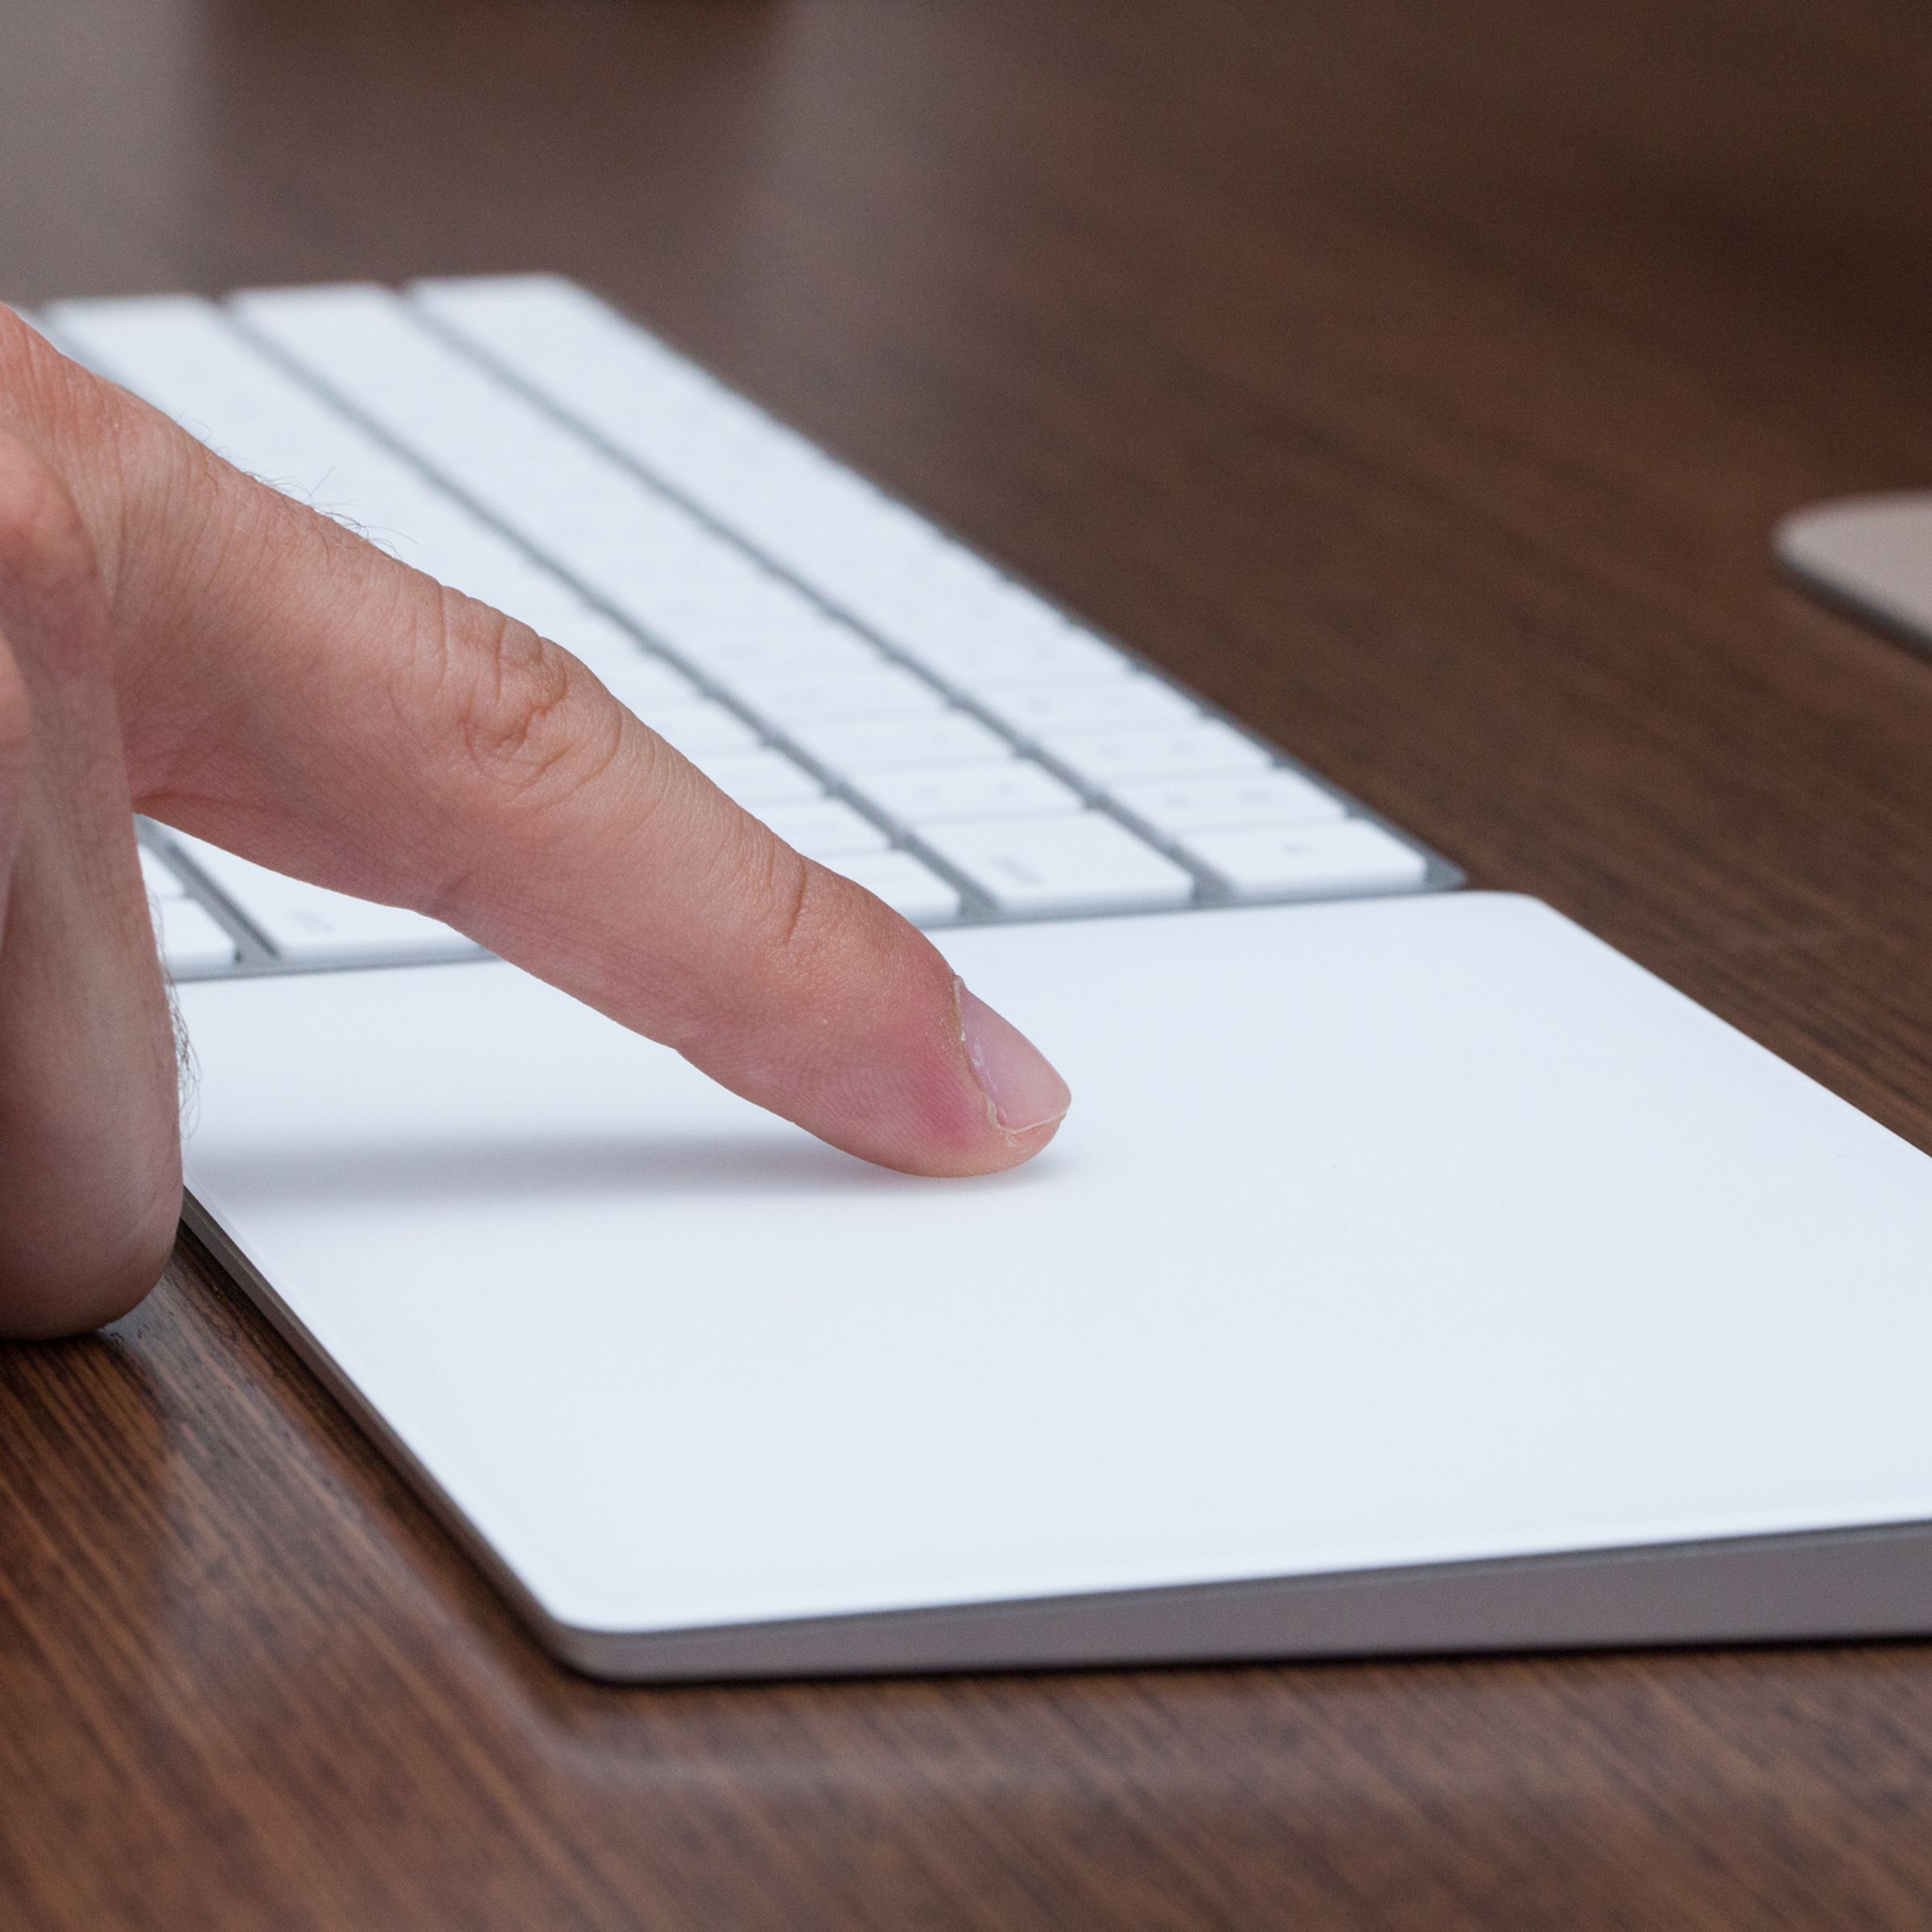 A finger touching Apple’s Magic Trackpad, which sits next to a keyboard on a desk.